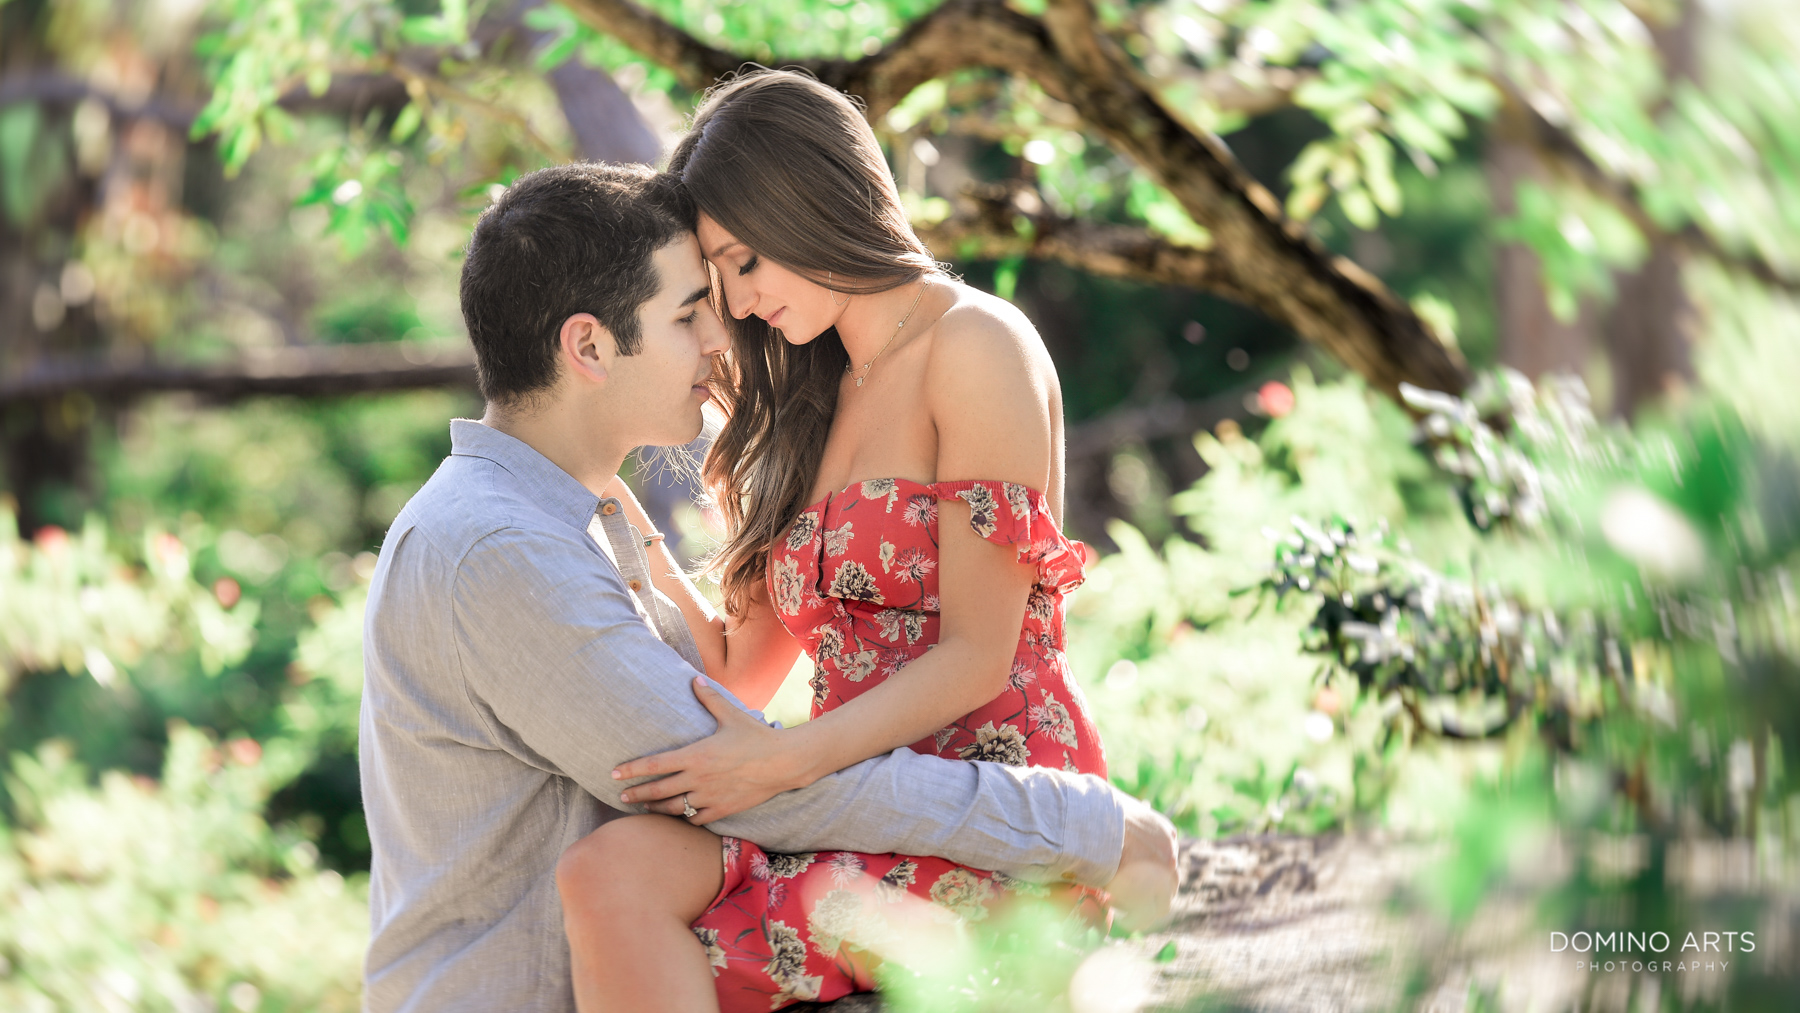 Romantic Outdoor Engagement Photography at Morikami Museum and Japanese Gardens